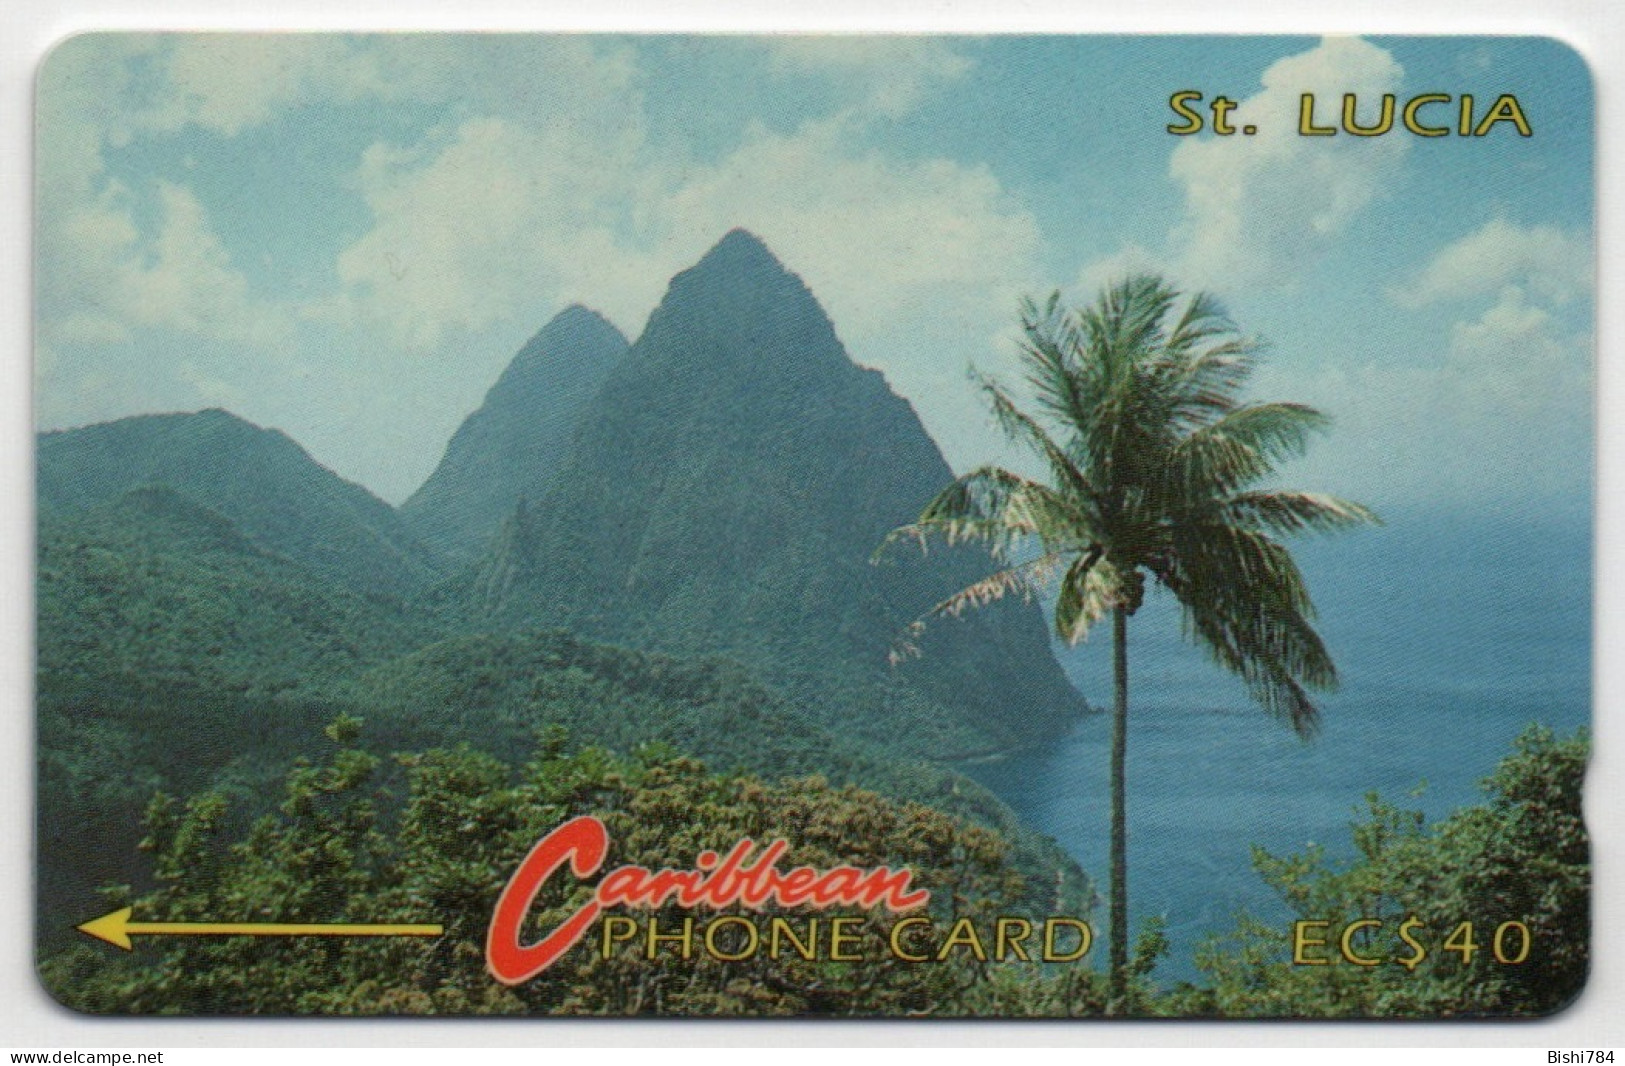 St. Lucia - Pitons - 3CSLC (Short, Italic Font With Curved 3) - St. Lucia